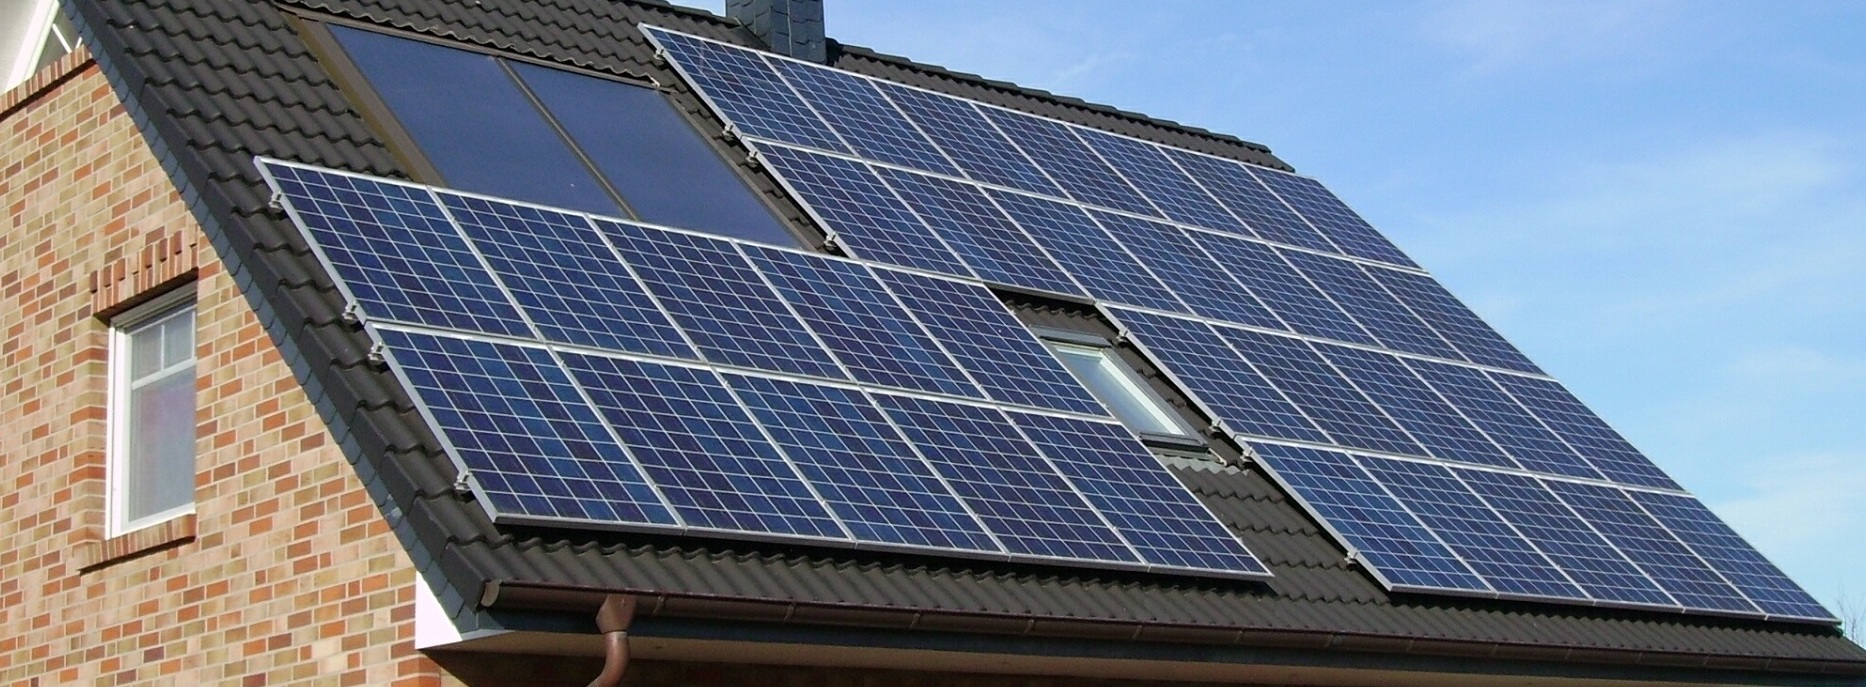 Solar panels on a steep roof